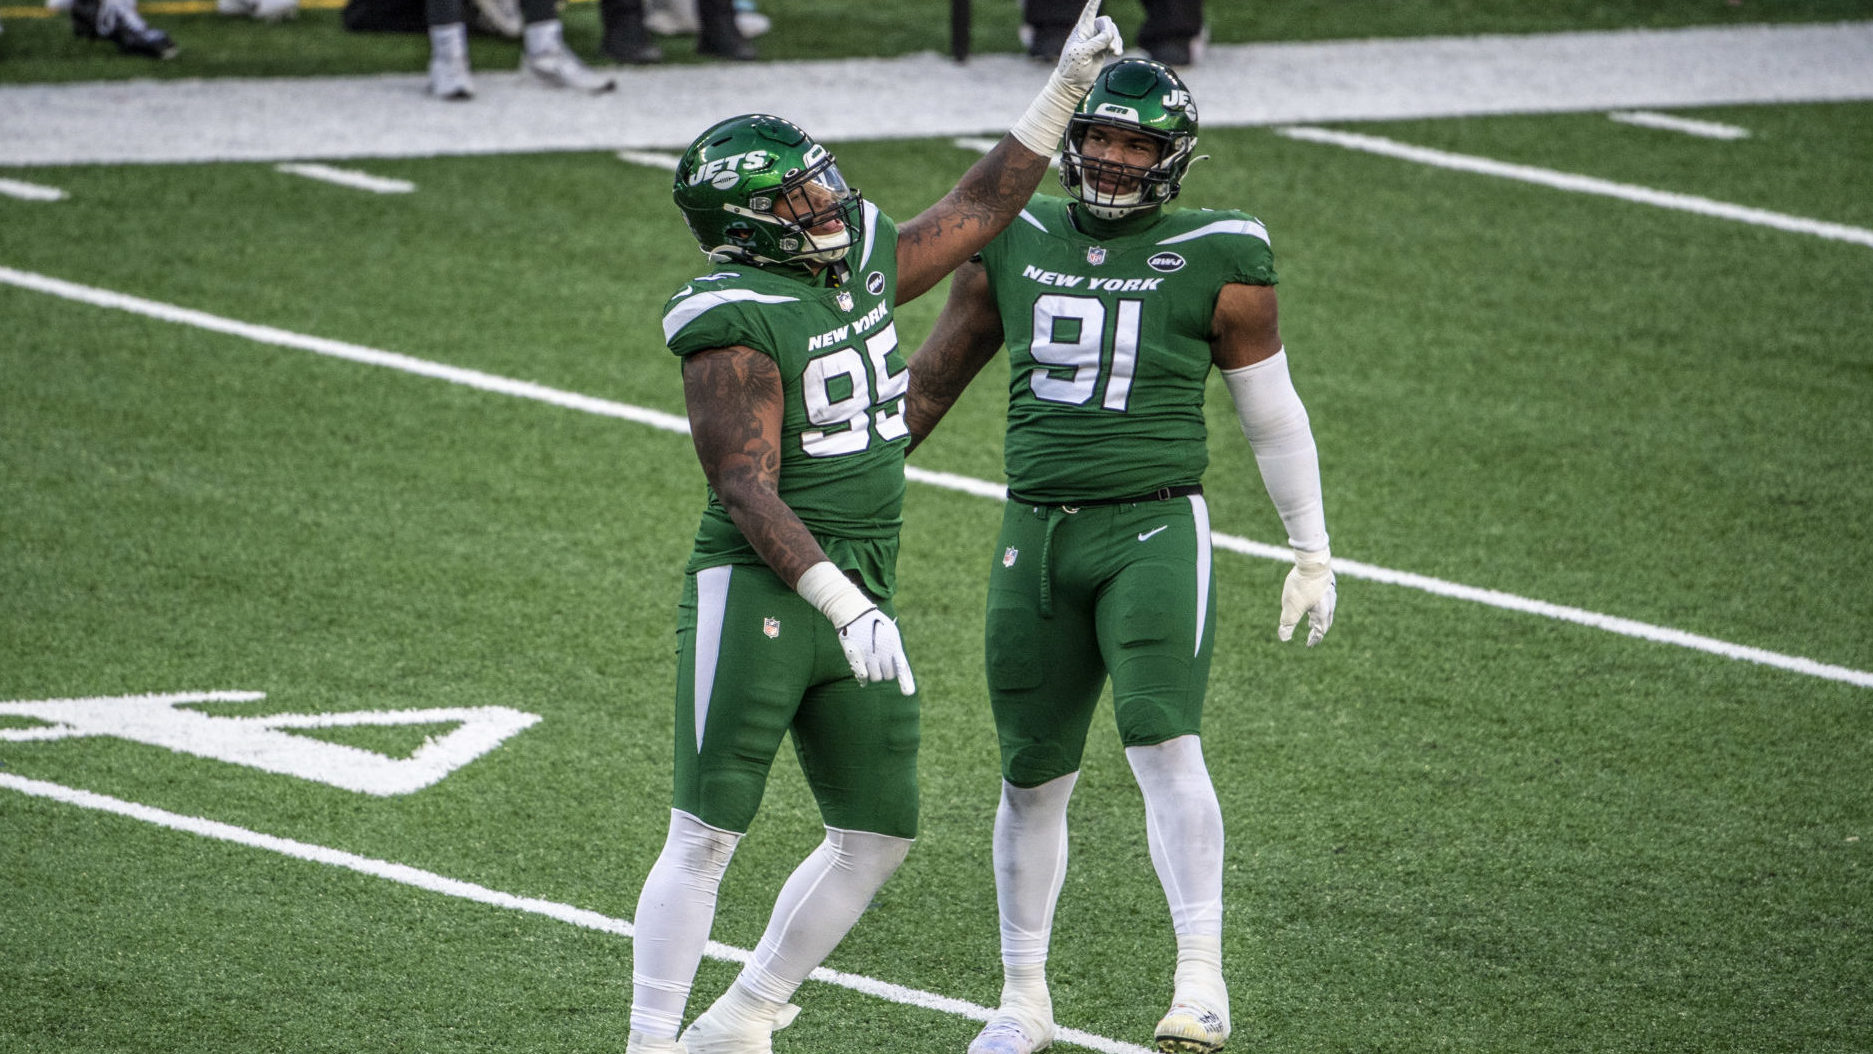 EAST RUTHERFORD, NJ - DECEMBER 06: Quinnen Williams #95 and John Franklin-Myers #91 of the New York Jets react during a regular season game against the Las Vegas Raiders at MetLife Stadium on December 6, 2020 in East Rutherford, New Jersey.